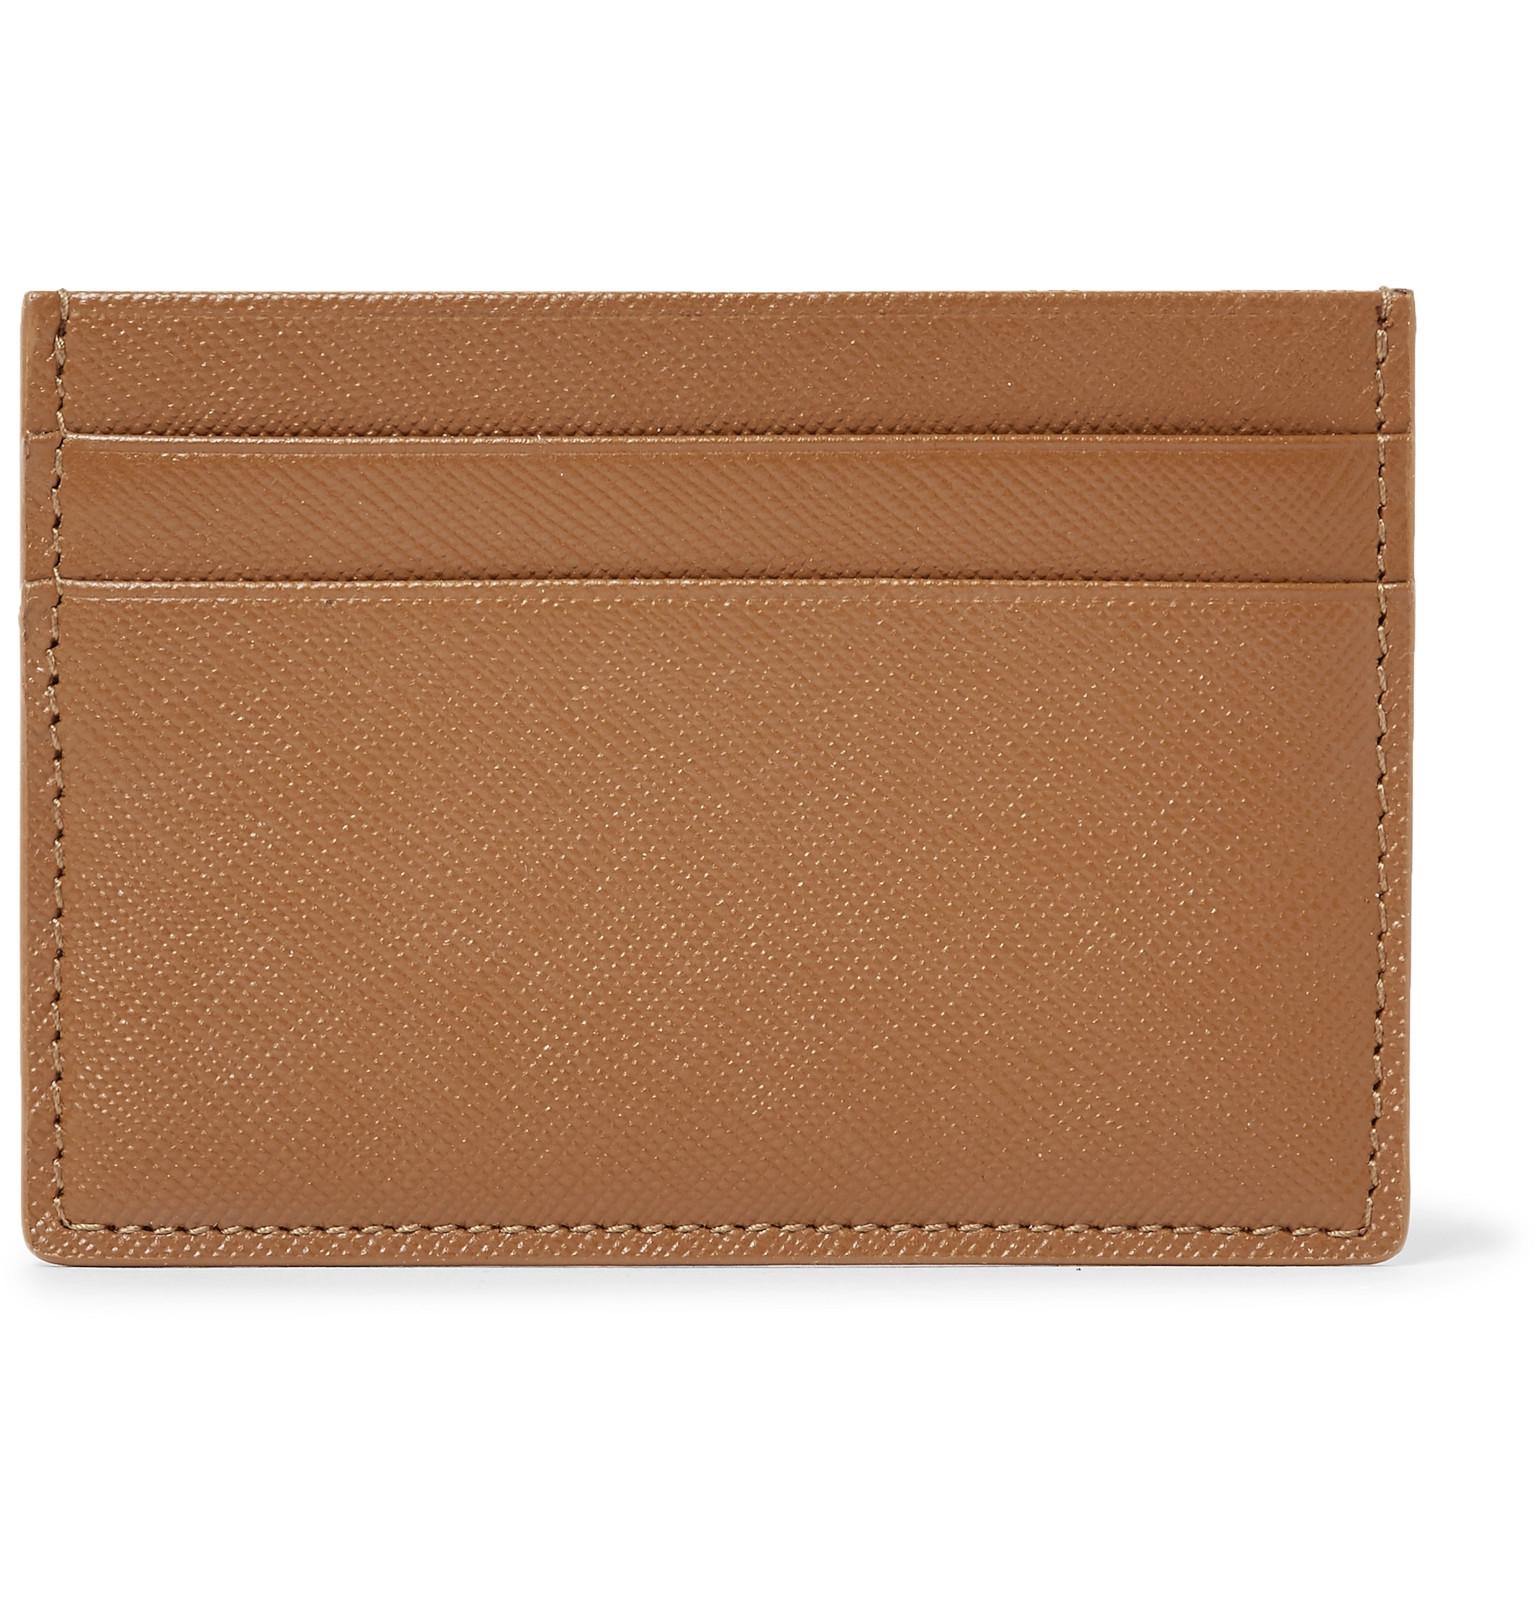 Common Projects Cross-grain Leather Cardholder in Brown for Men - Lyst